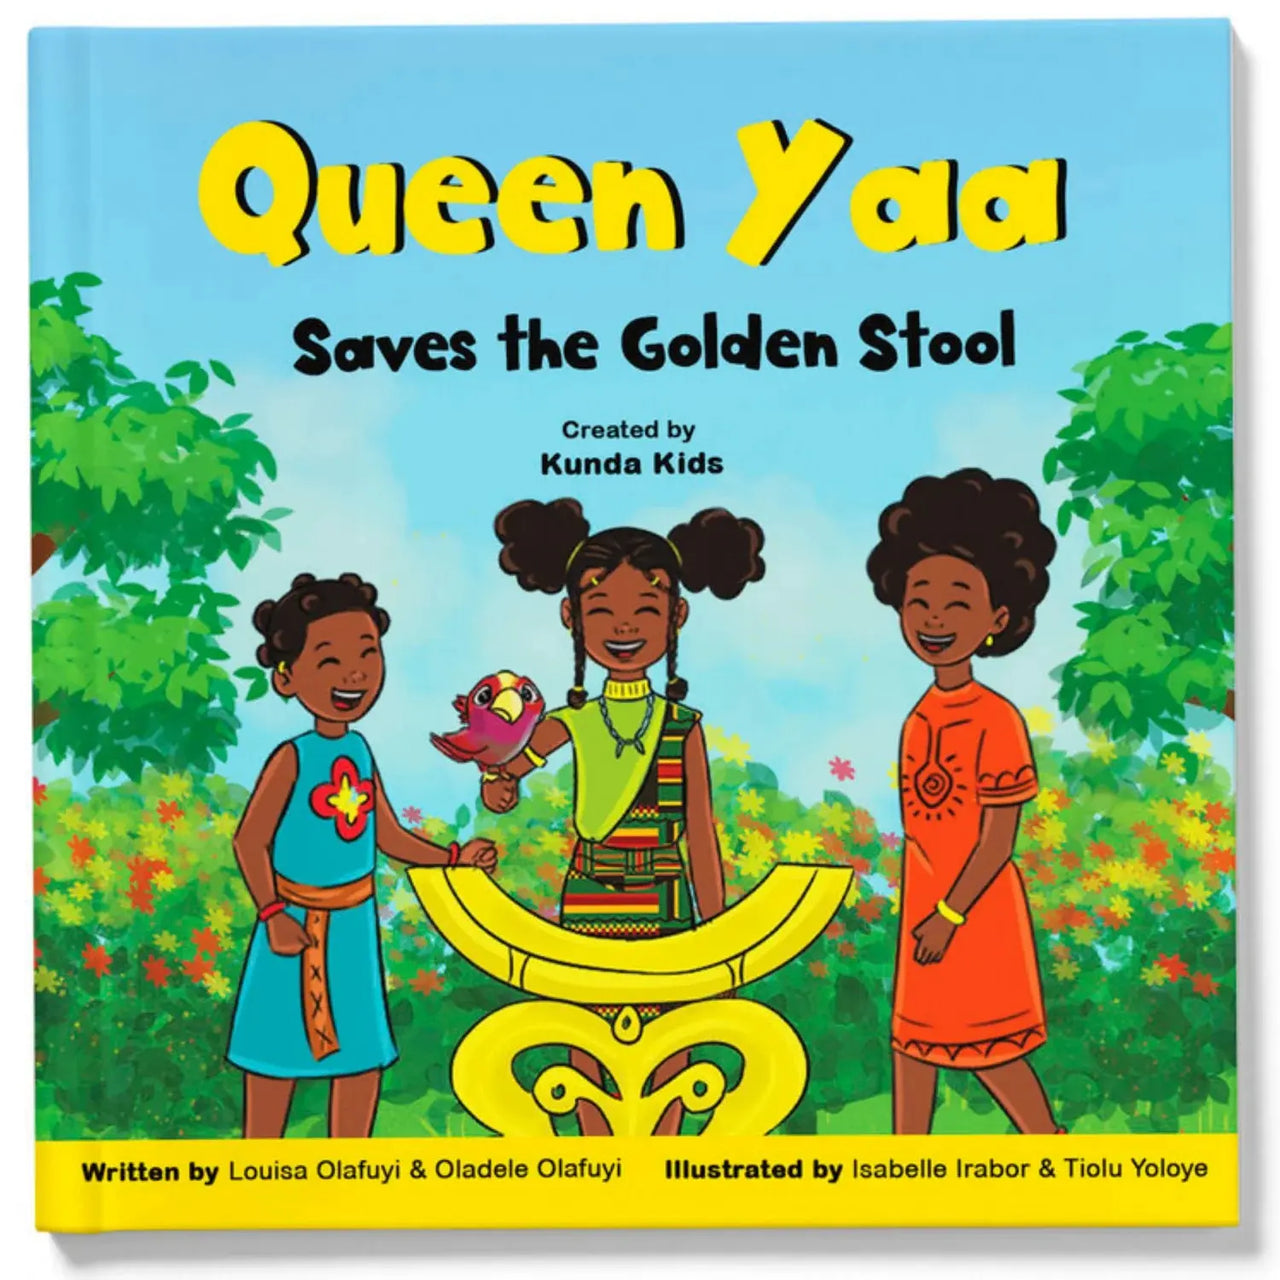 Queen Yaa Saves the Golden Stool by Louisa Olafuyi & Oladele Olafuyi (Used Book) Master Kids Company Used Book 